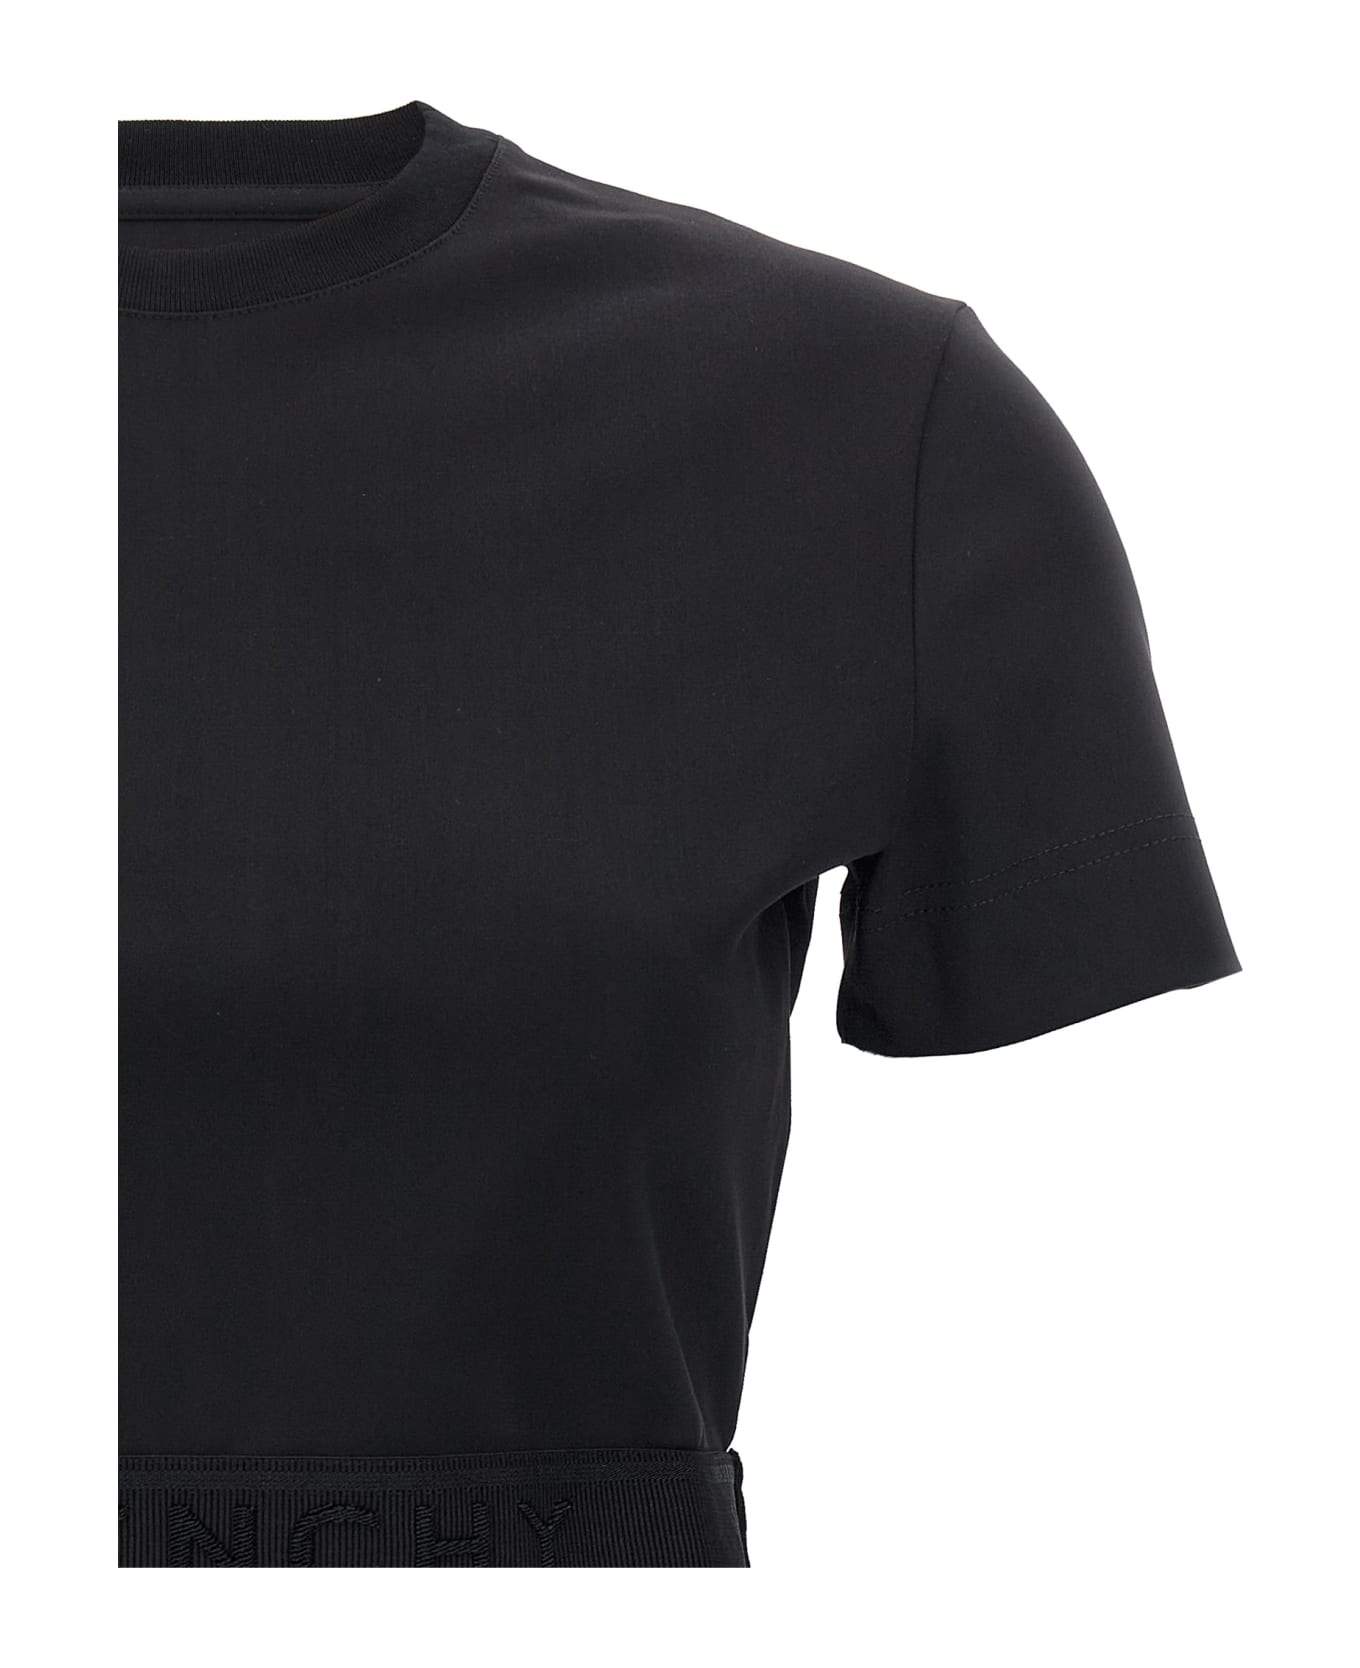 Givenchy Cropped T-shirt - Black